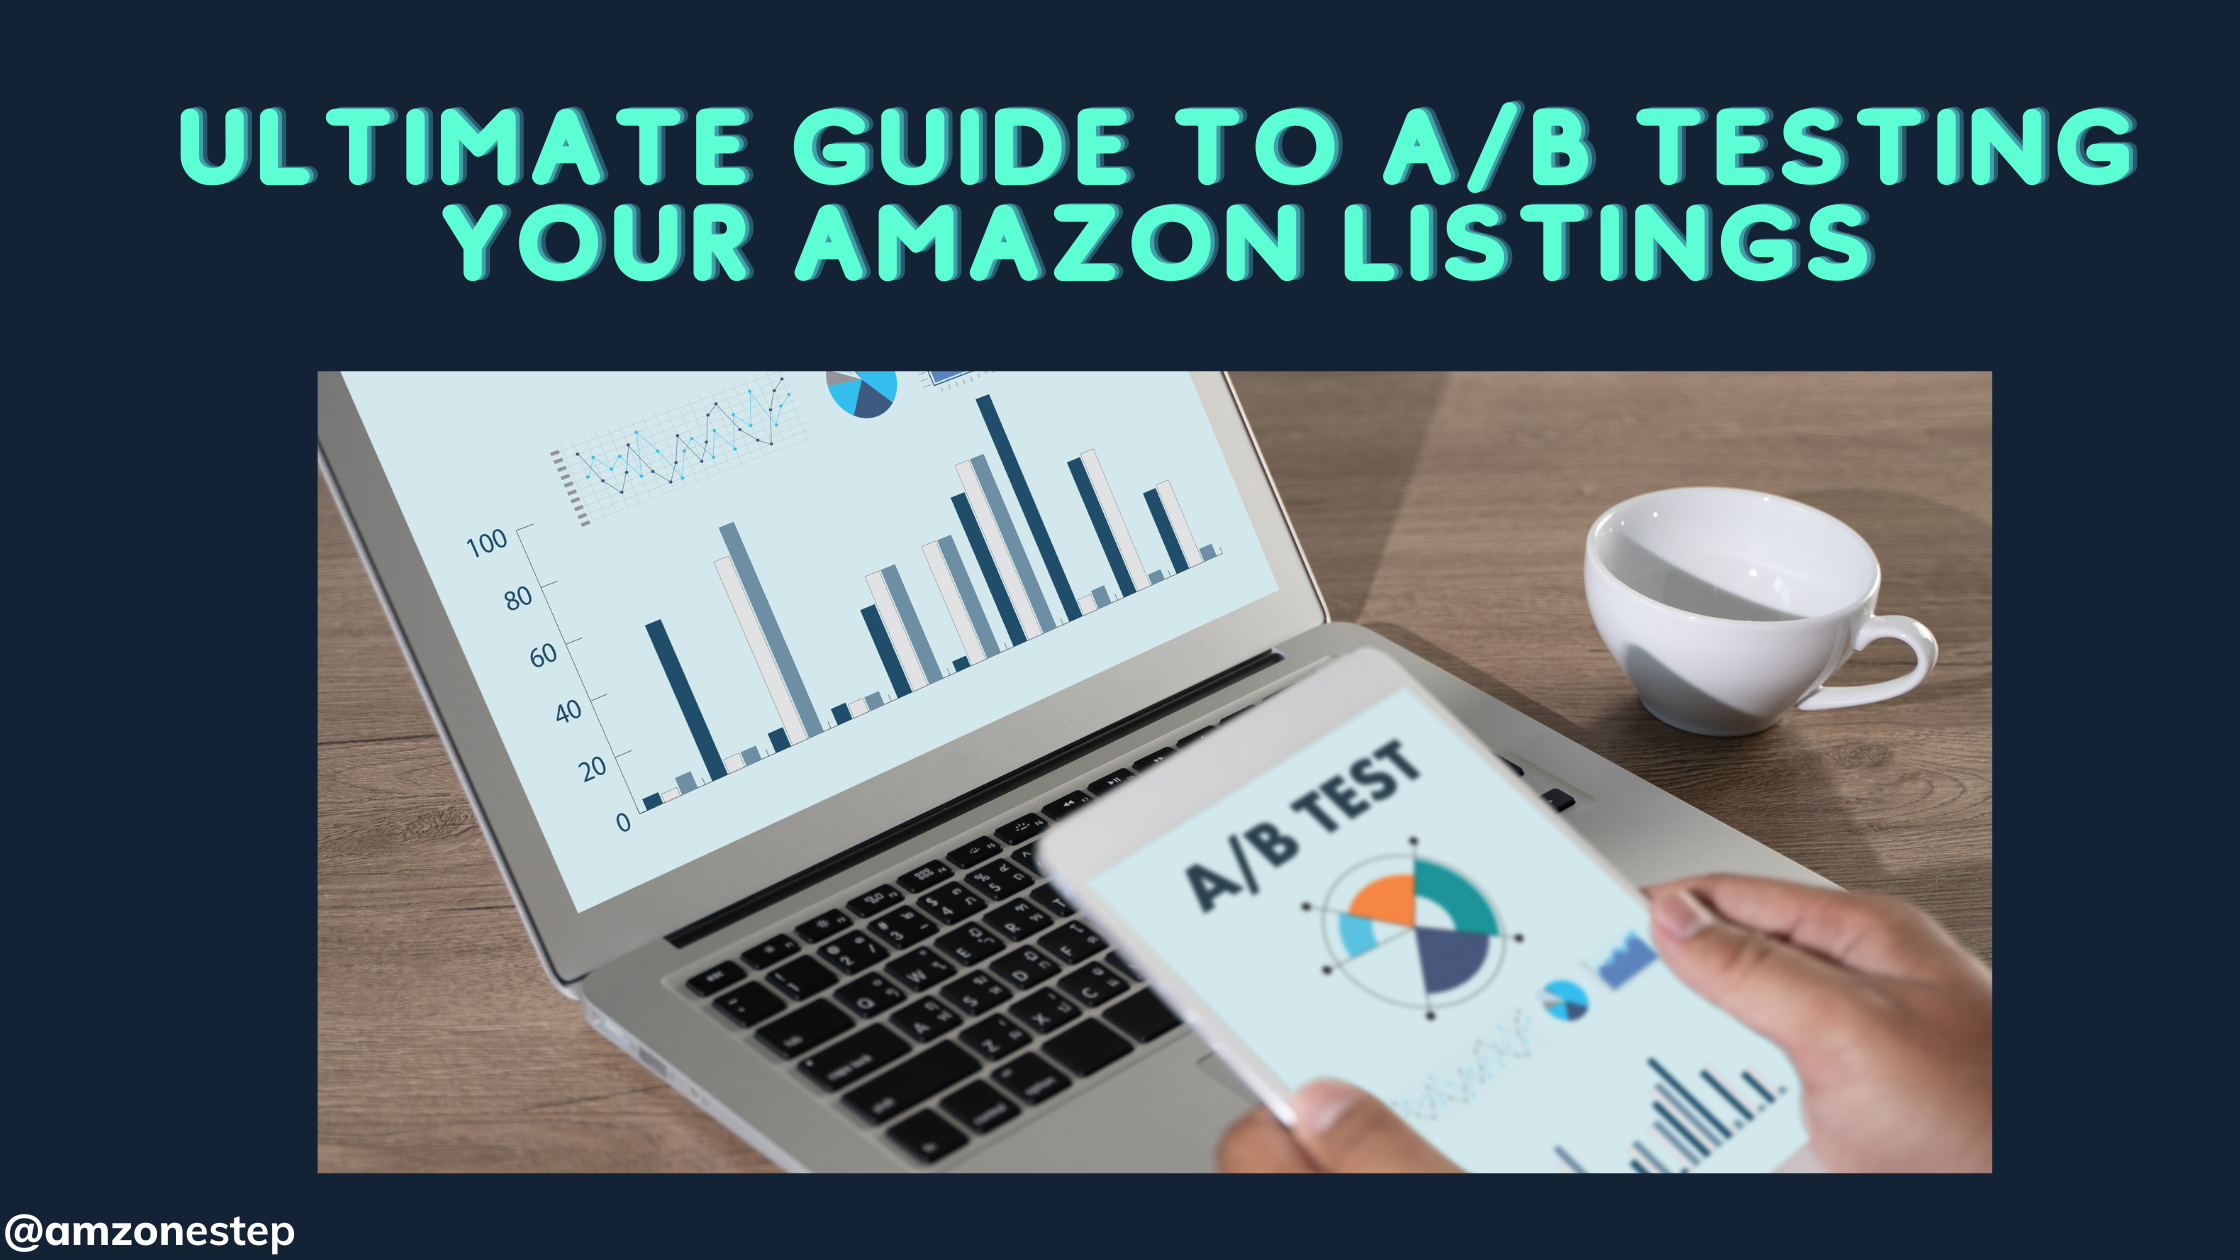 Ultimate Guide to A/B Testing your Amazon Listings